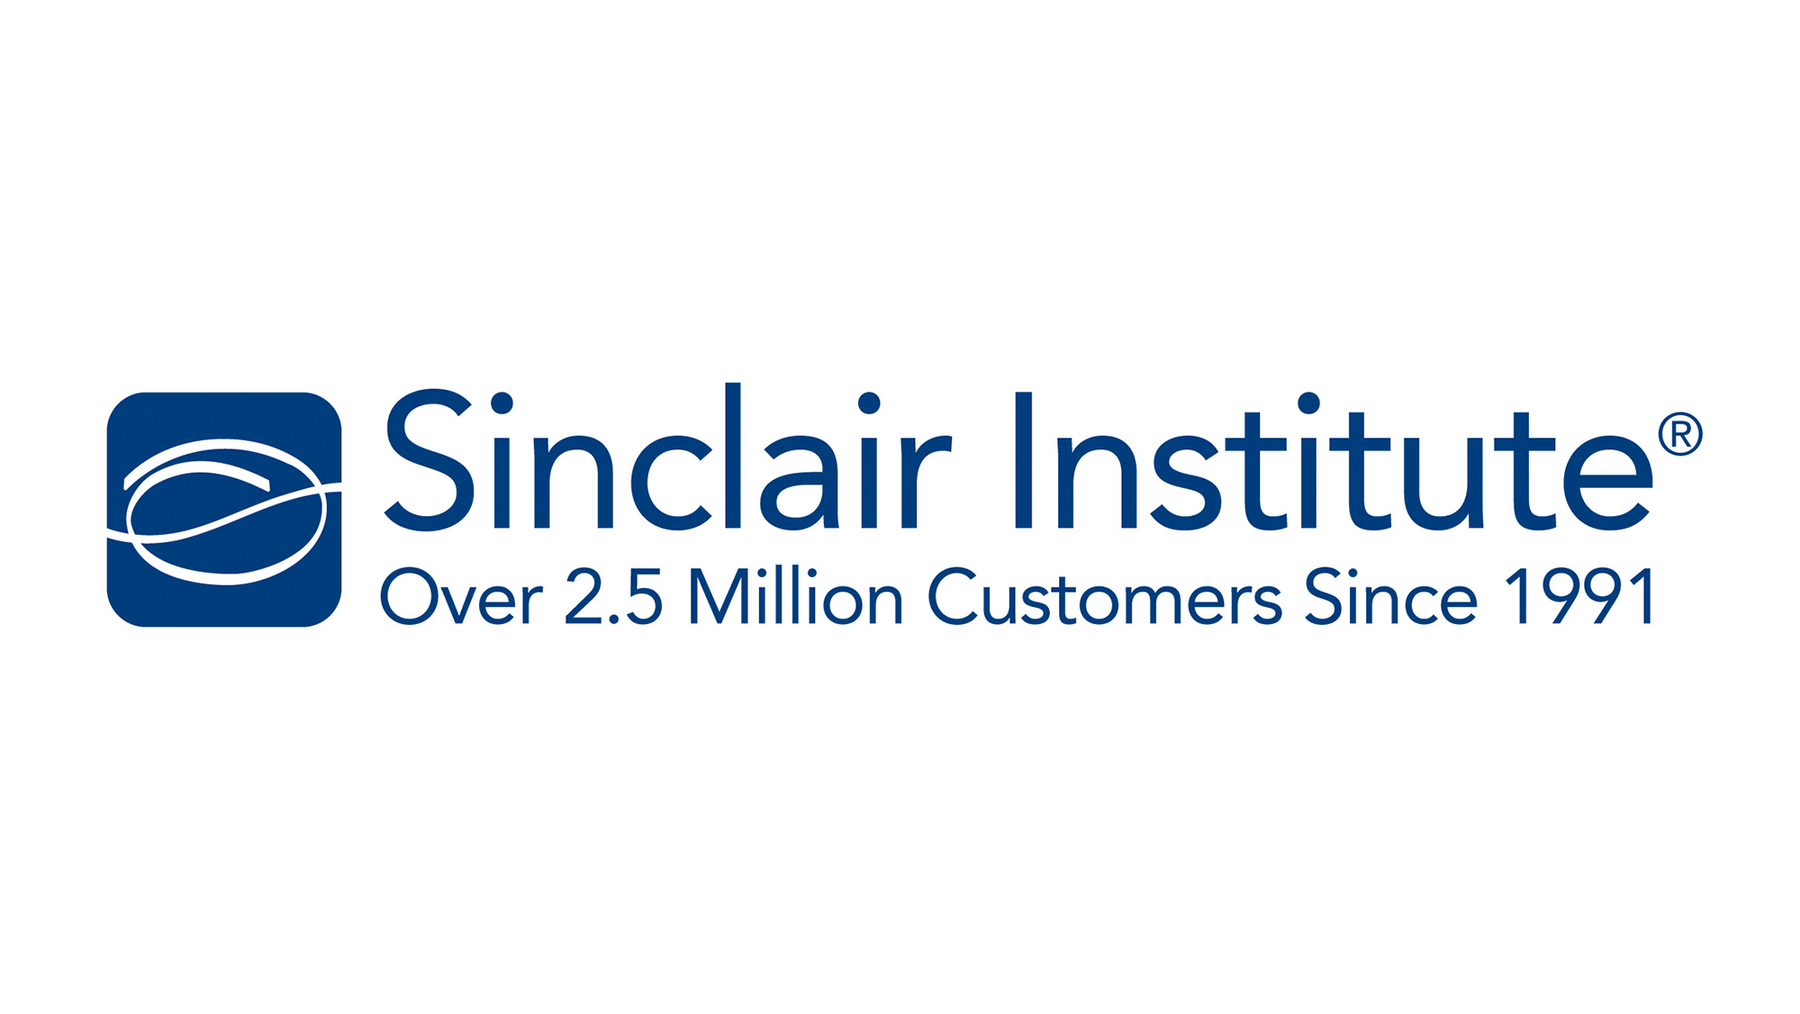 THE ELATOR ANNOUNCES IT'S RECOGNITION FROM THE SINCLAIR INSTITUTE